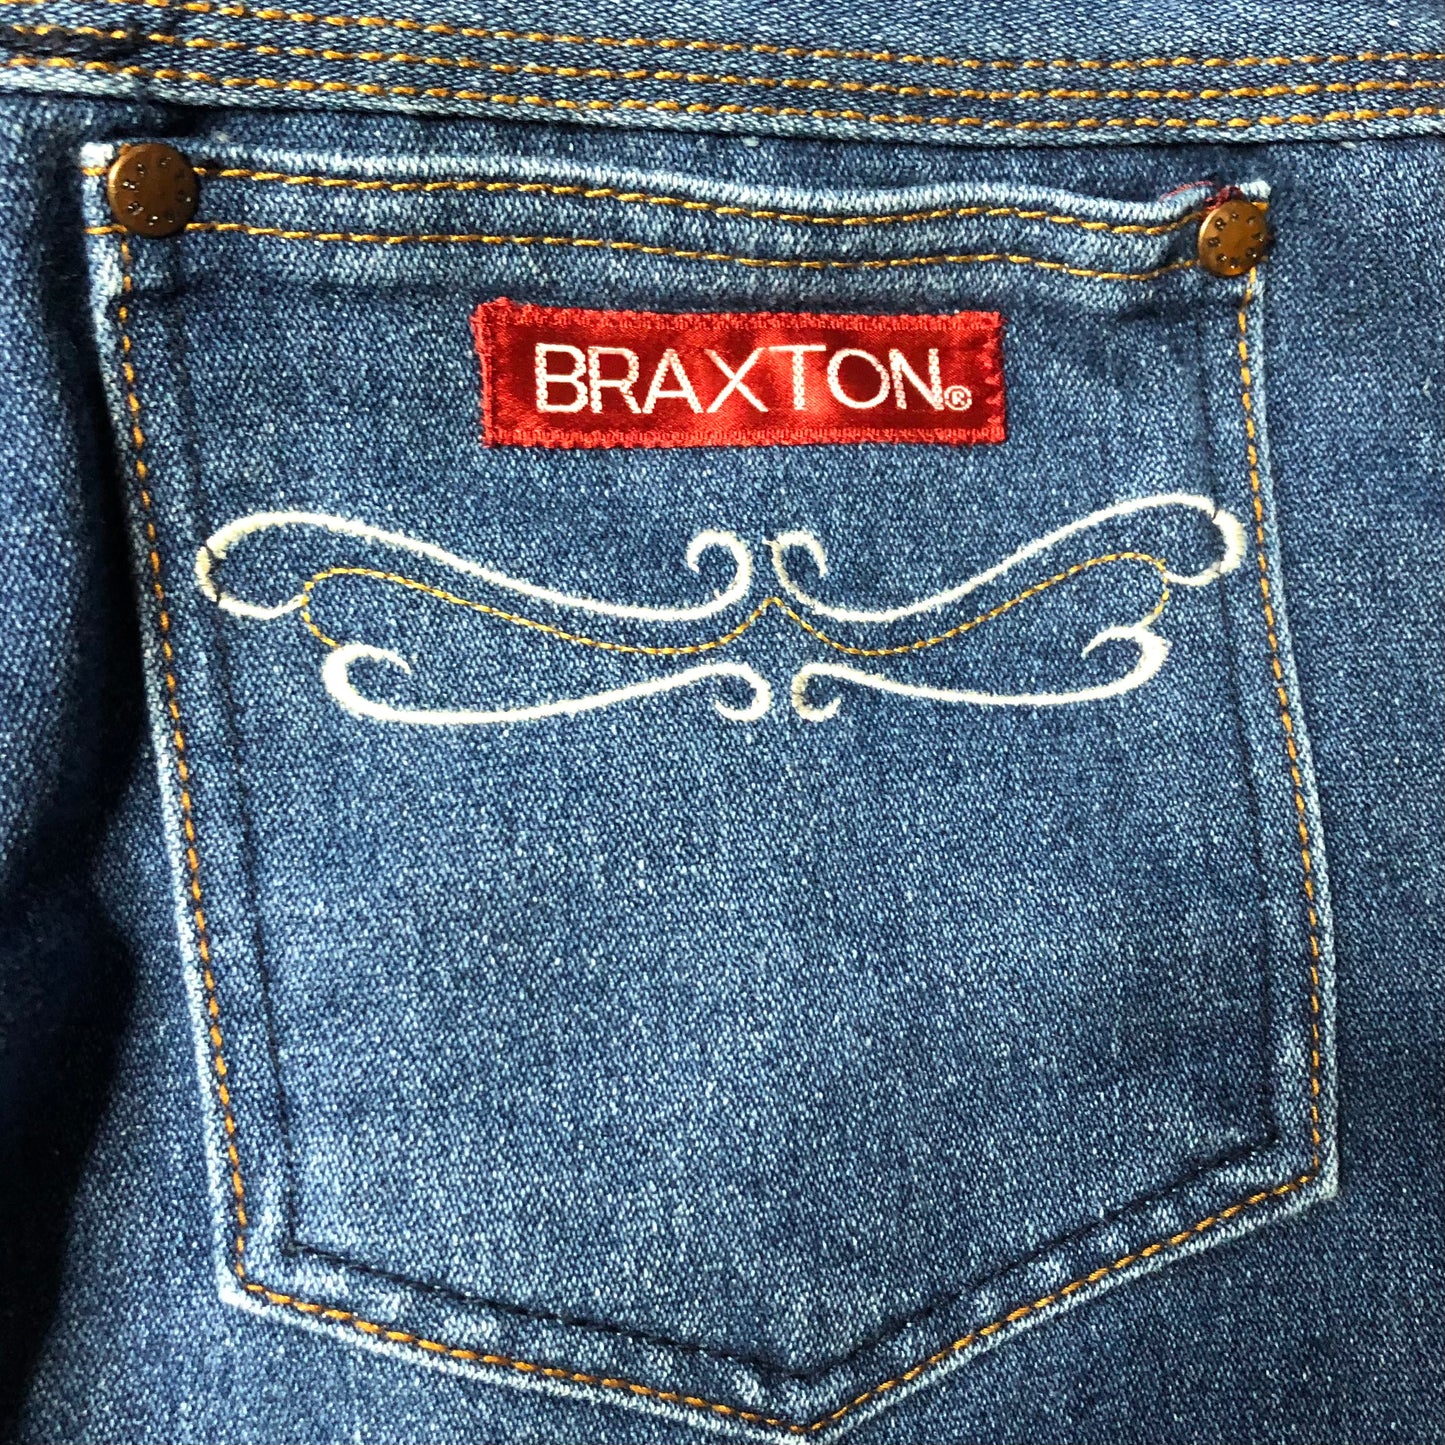 80’s Vintage Women’s Braxton High Waisted Jeans Made in Taiwan